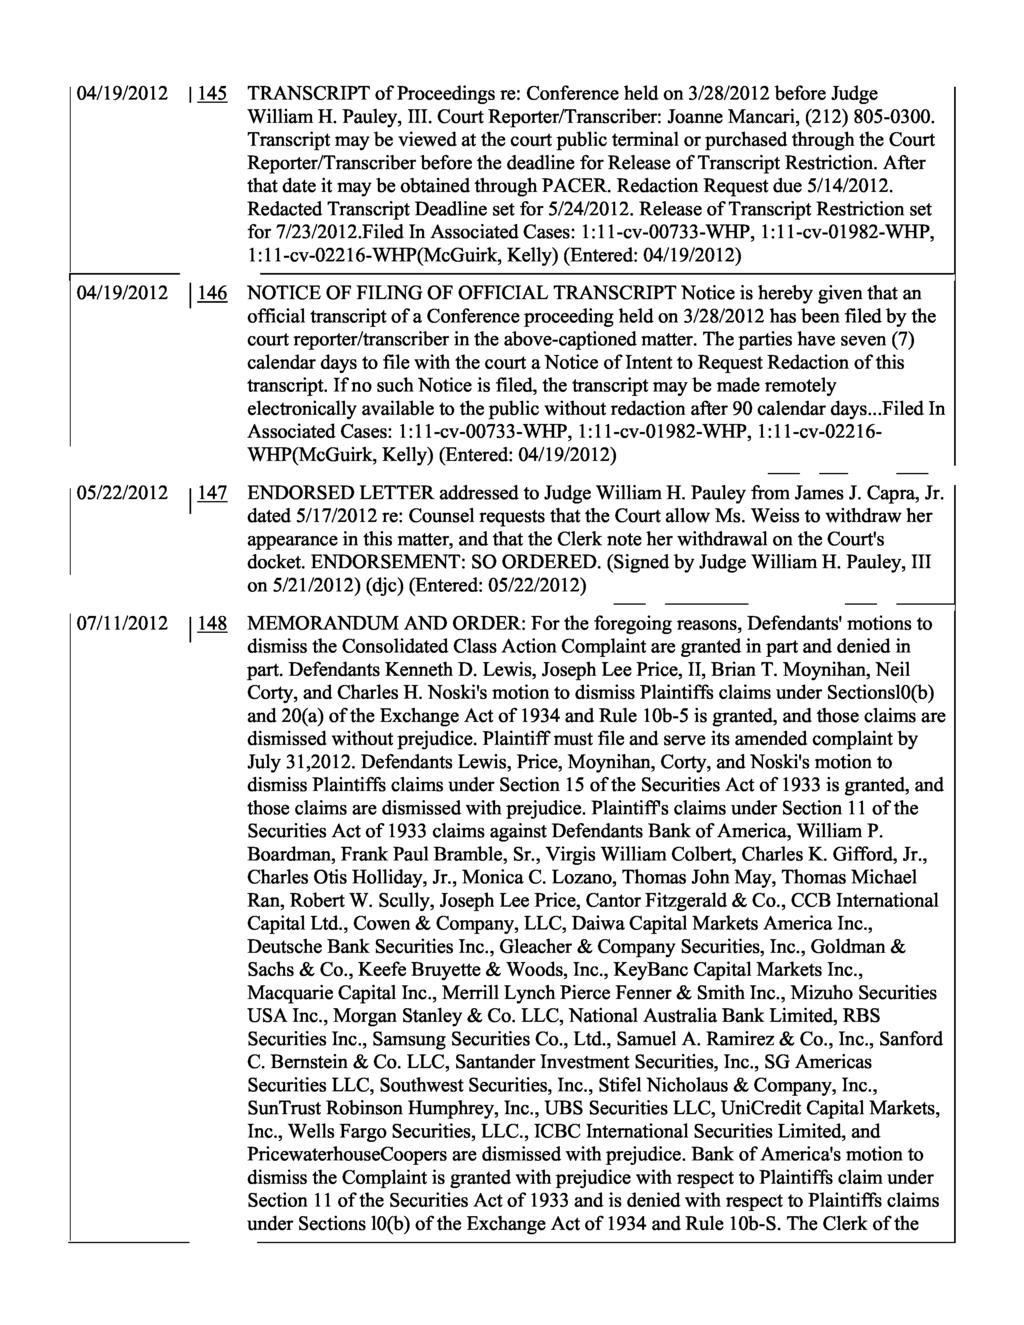 04/19/2012 145 TRANSCRIPT of Proceedings re: Conference held on 3/28/2012 before Judge William H. Pauley, III. Court Reporter/Transcriber: Joanne Mancari, (212) 805-0300.